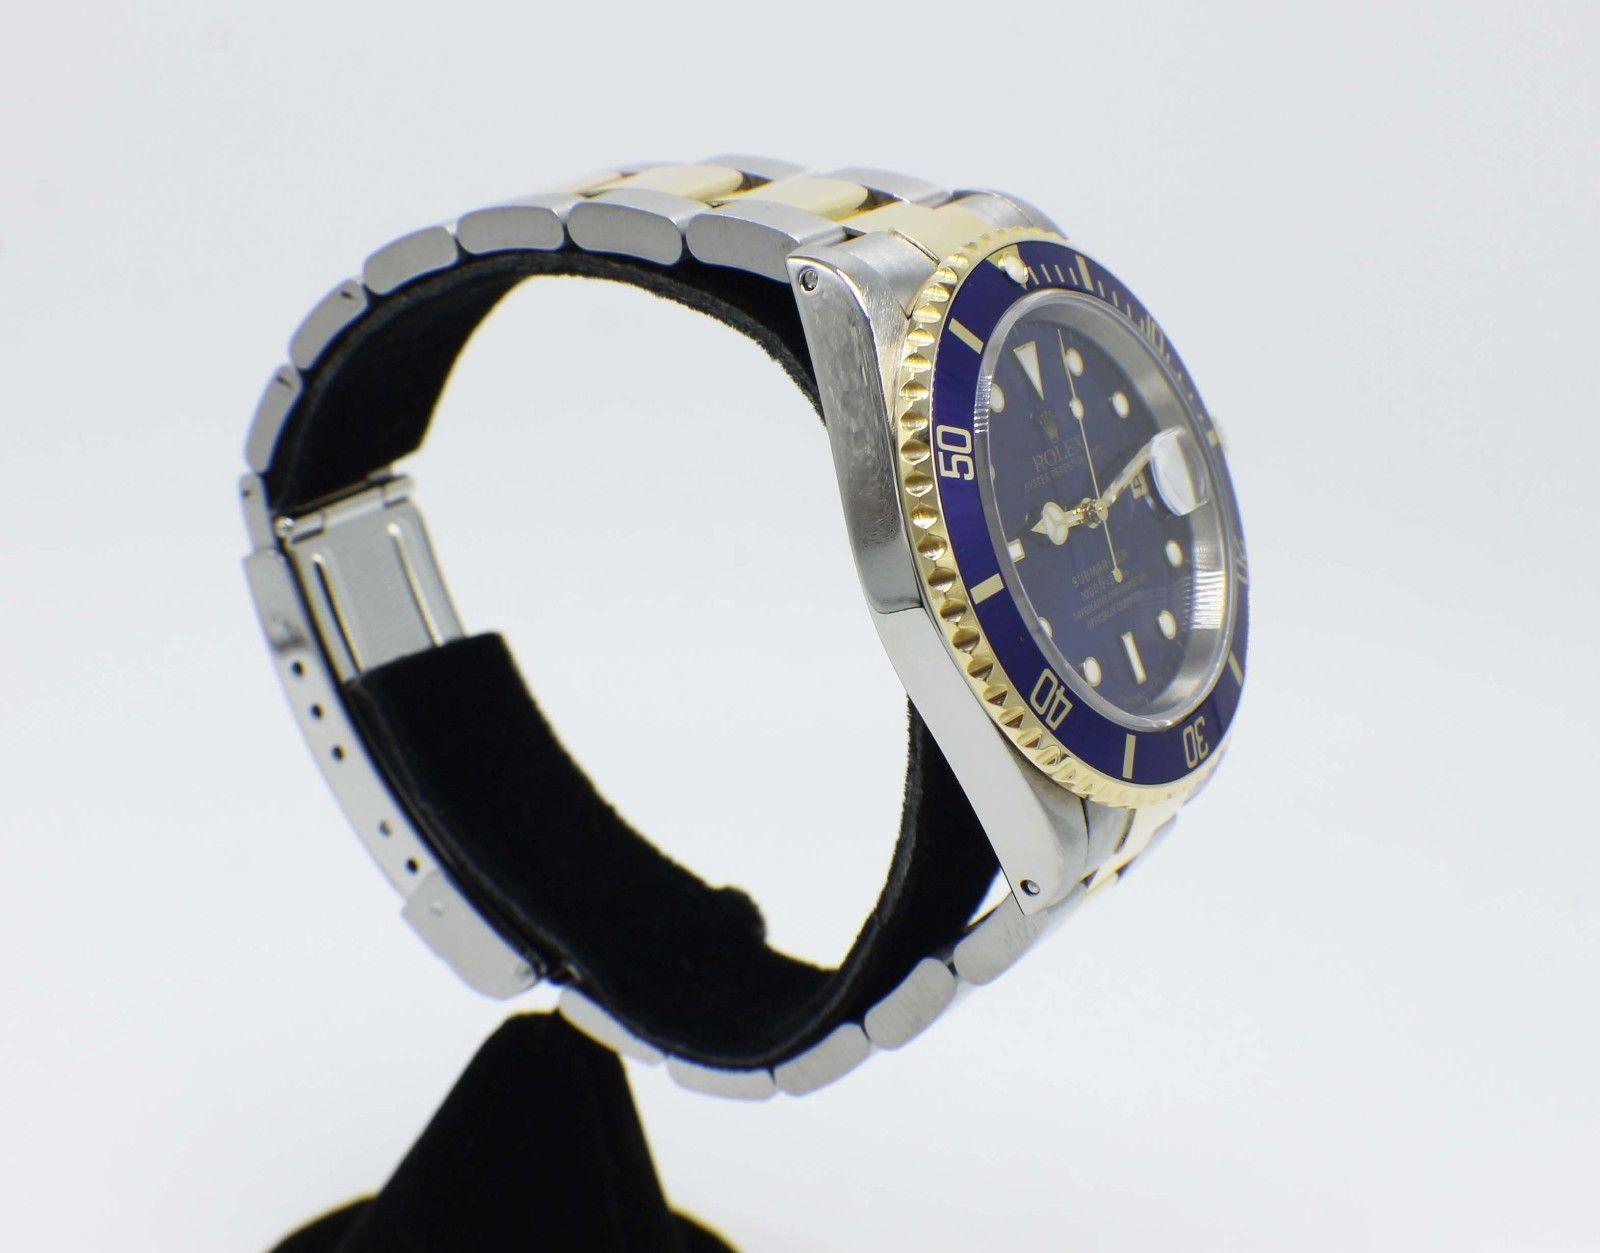 Rolex Submariner Blue 16613 18 Karat Gold and Stainless Steel Box and Papers 2